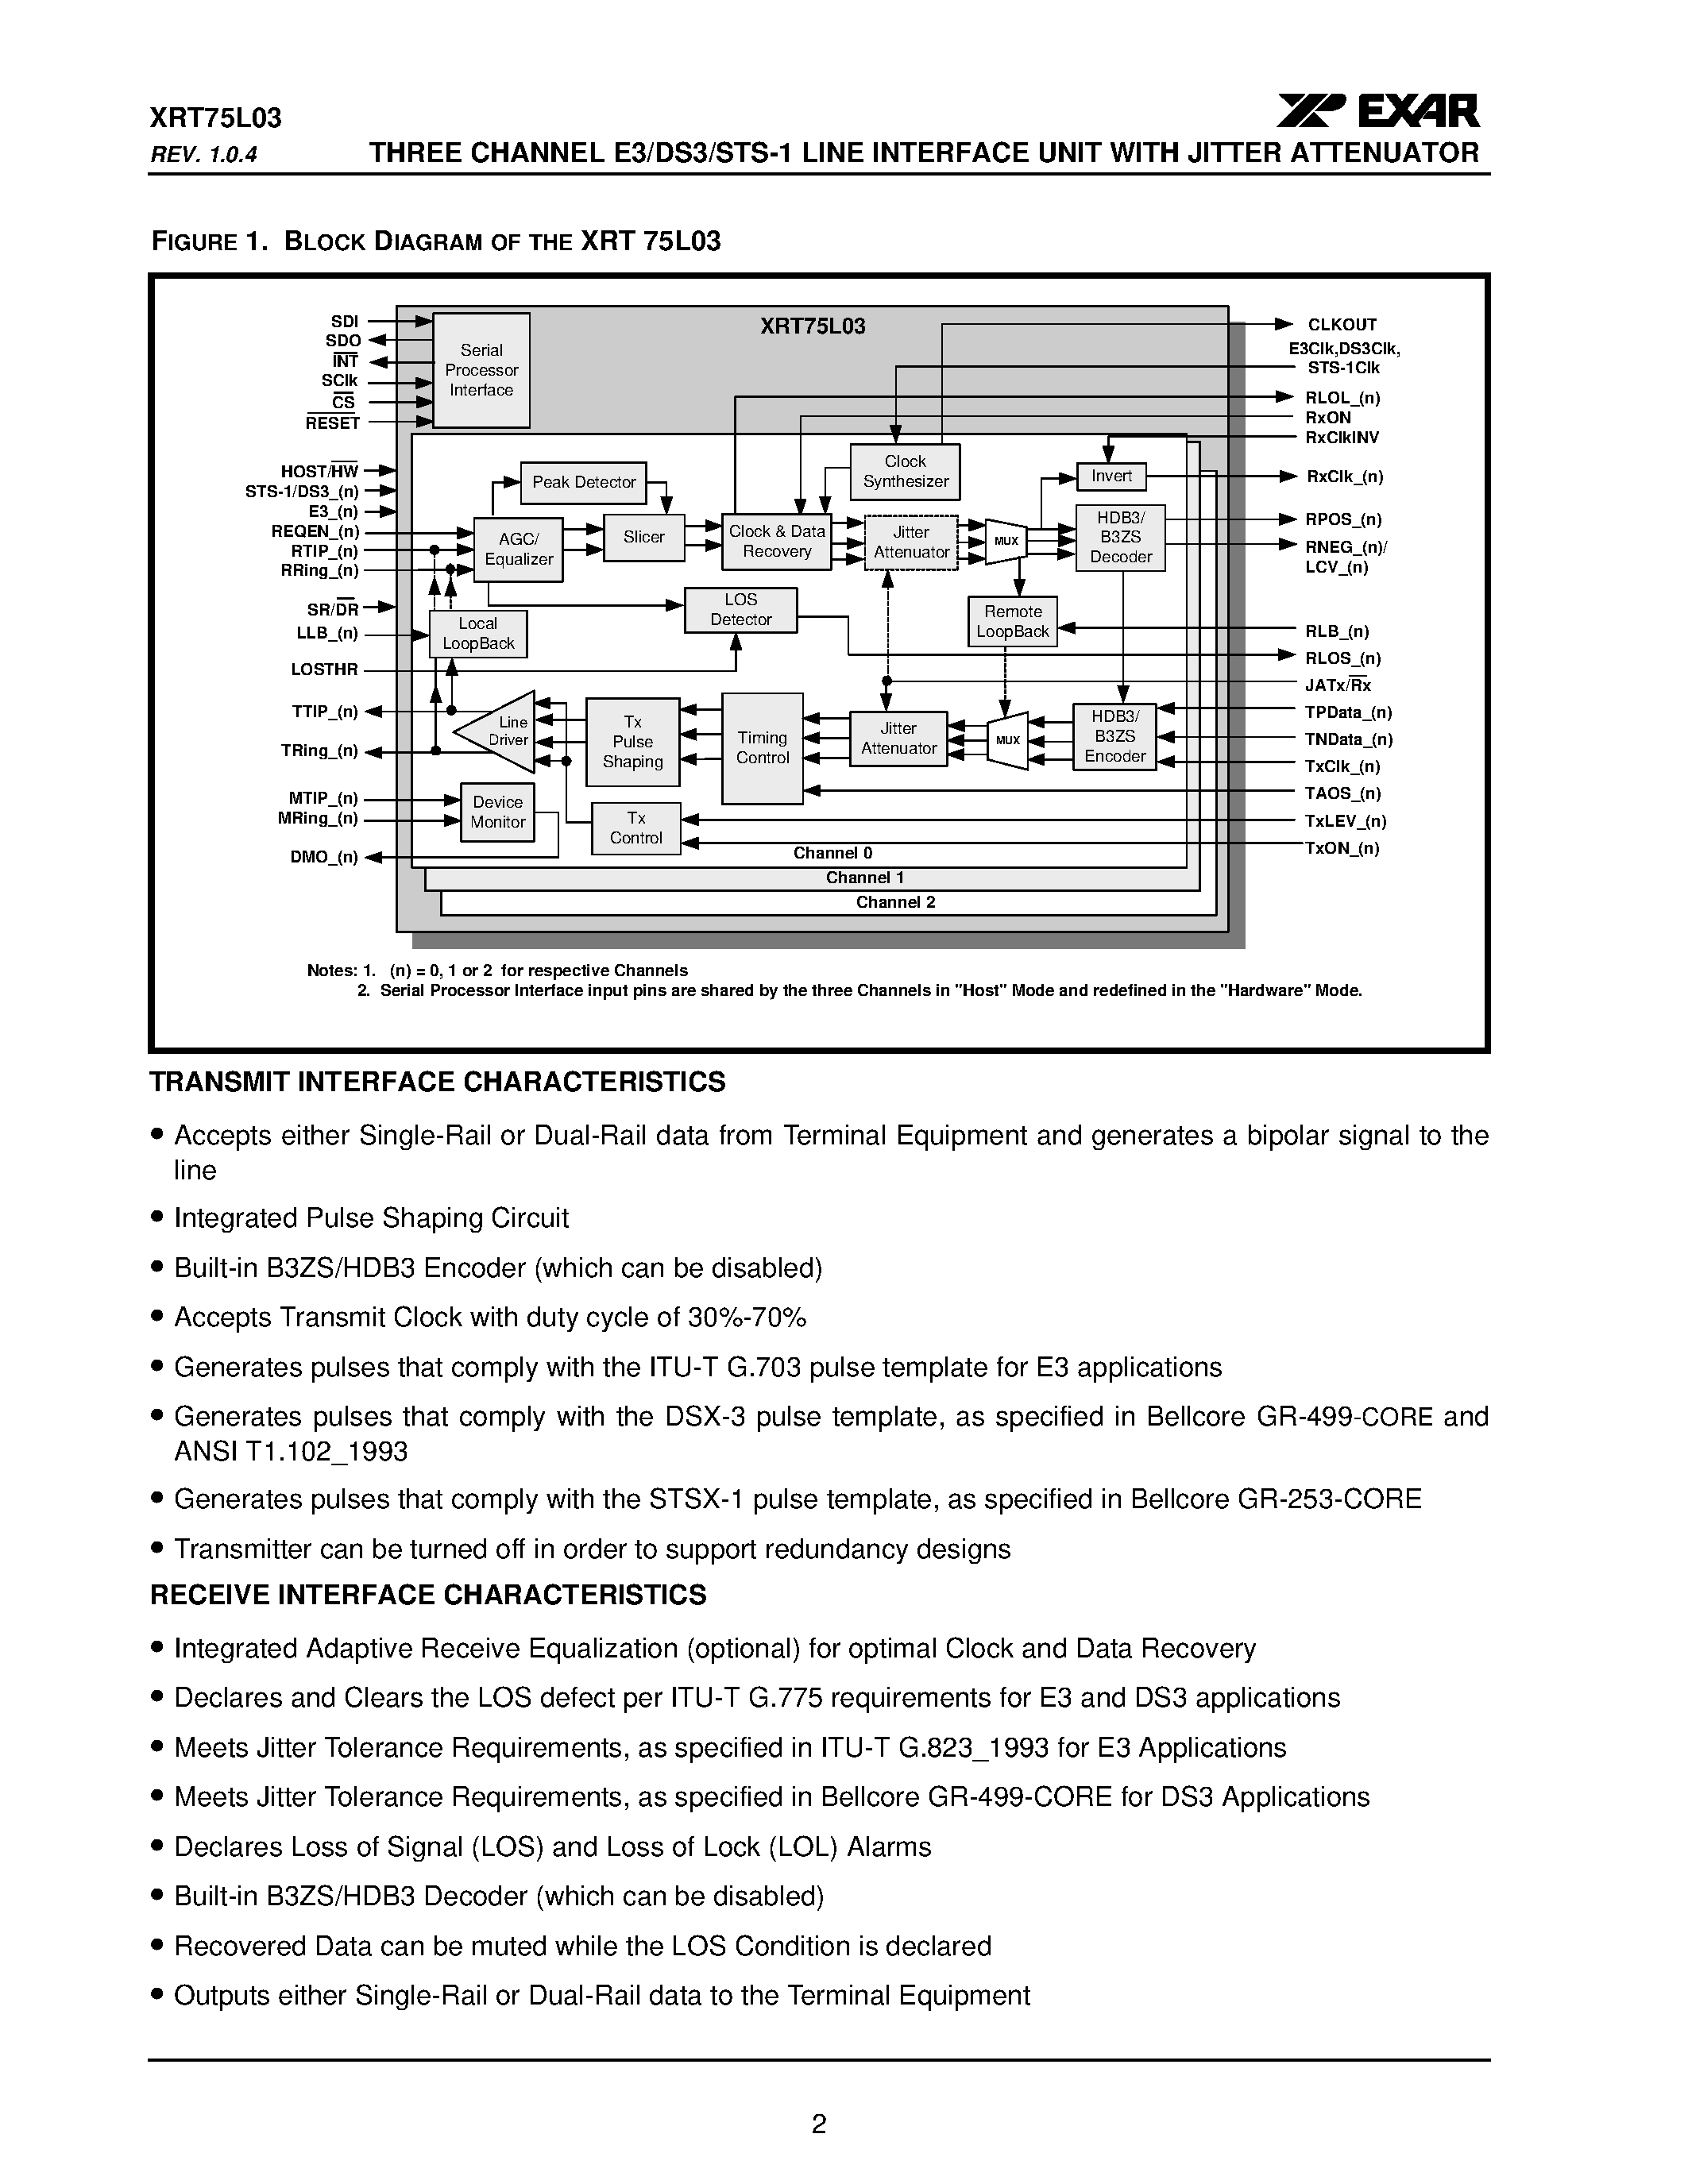 Datasheet XRT75L03 - THREE CHANNEL E3/DS3/STS-1 LINE INTERFACE UNIT page 2